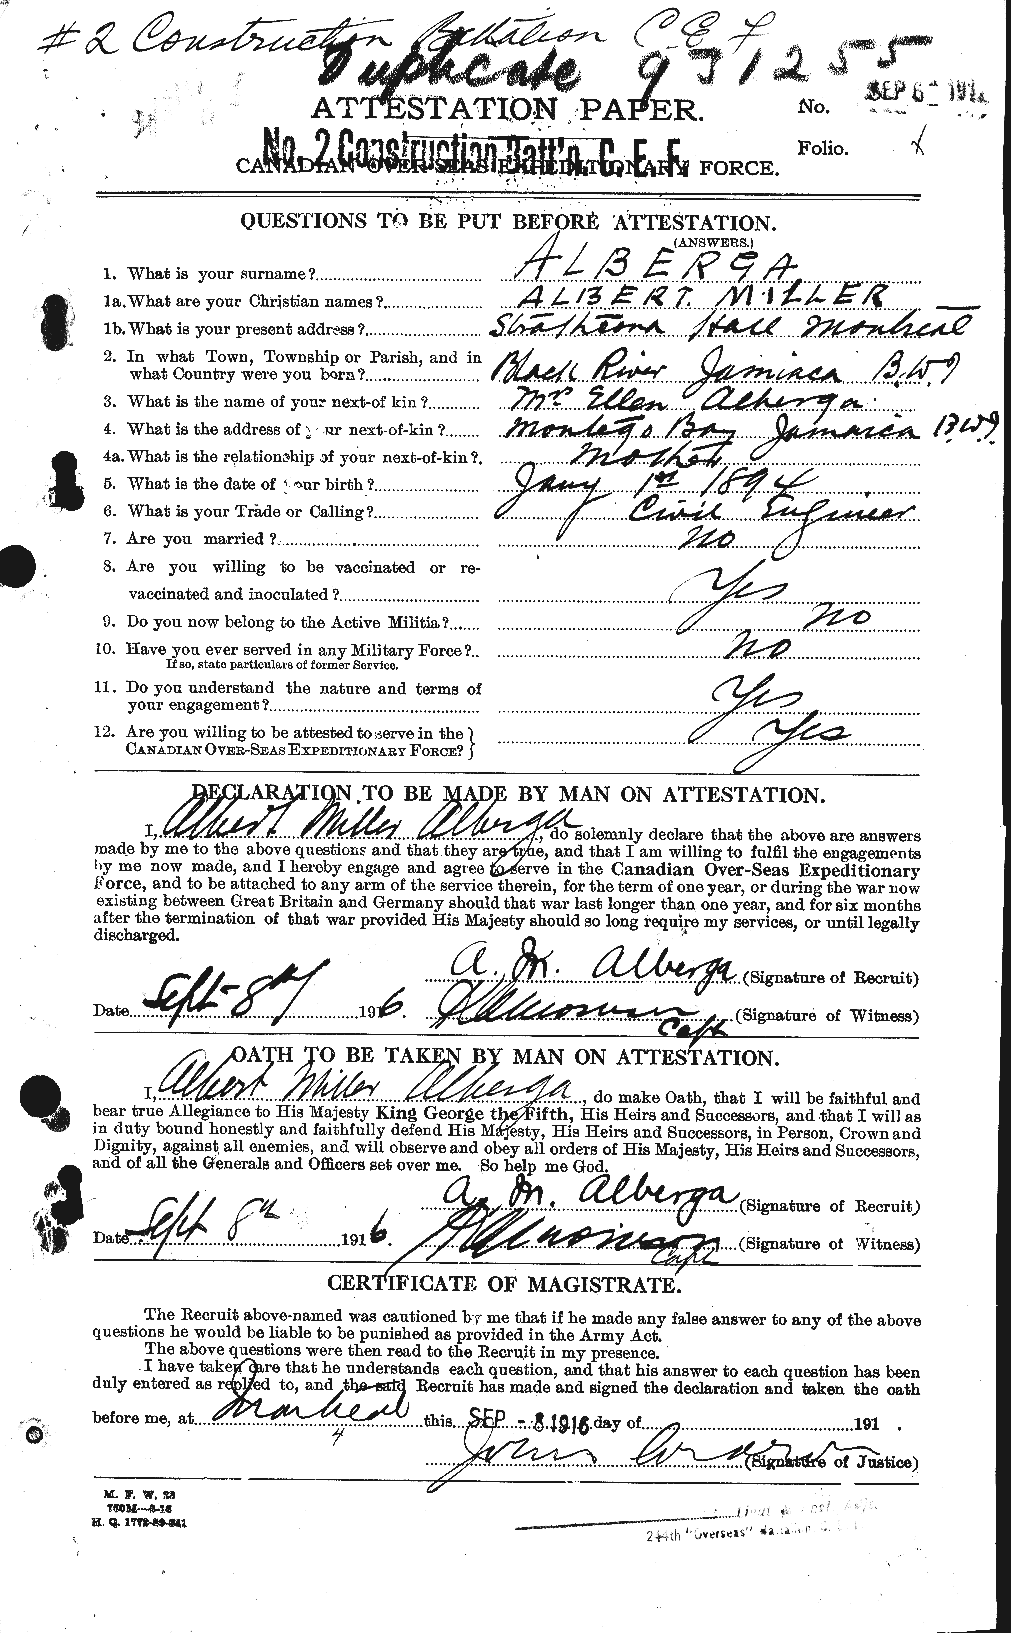 Personnel Records of the First World War - CEF 204540a